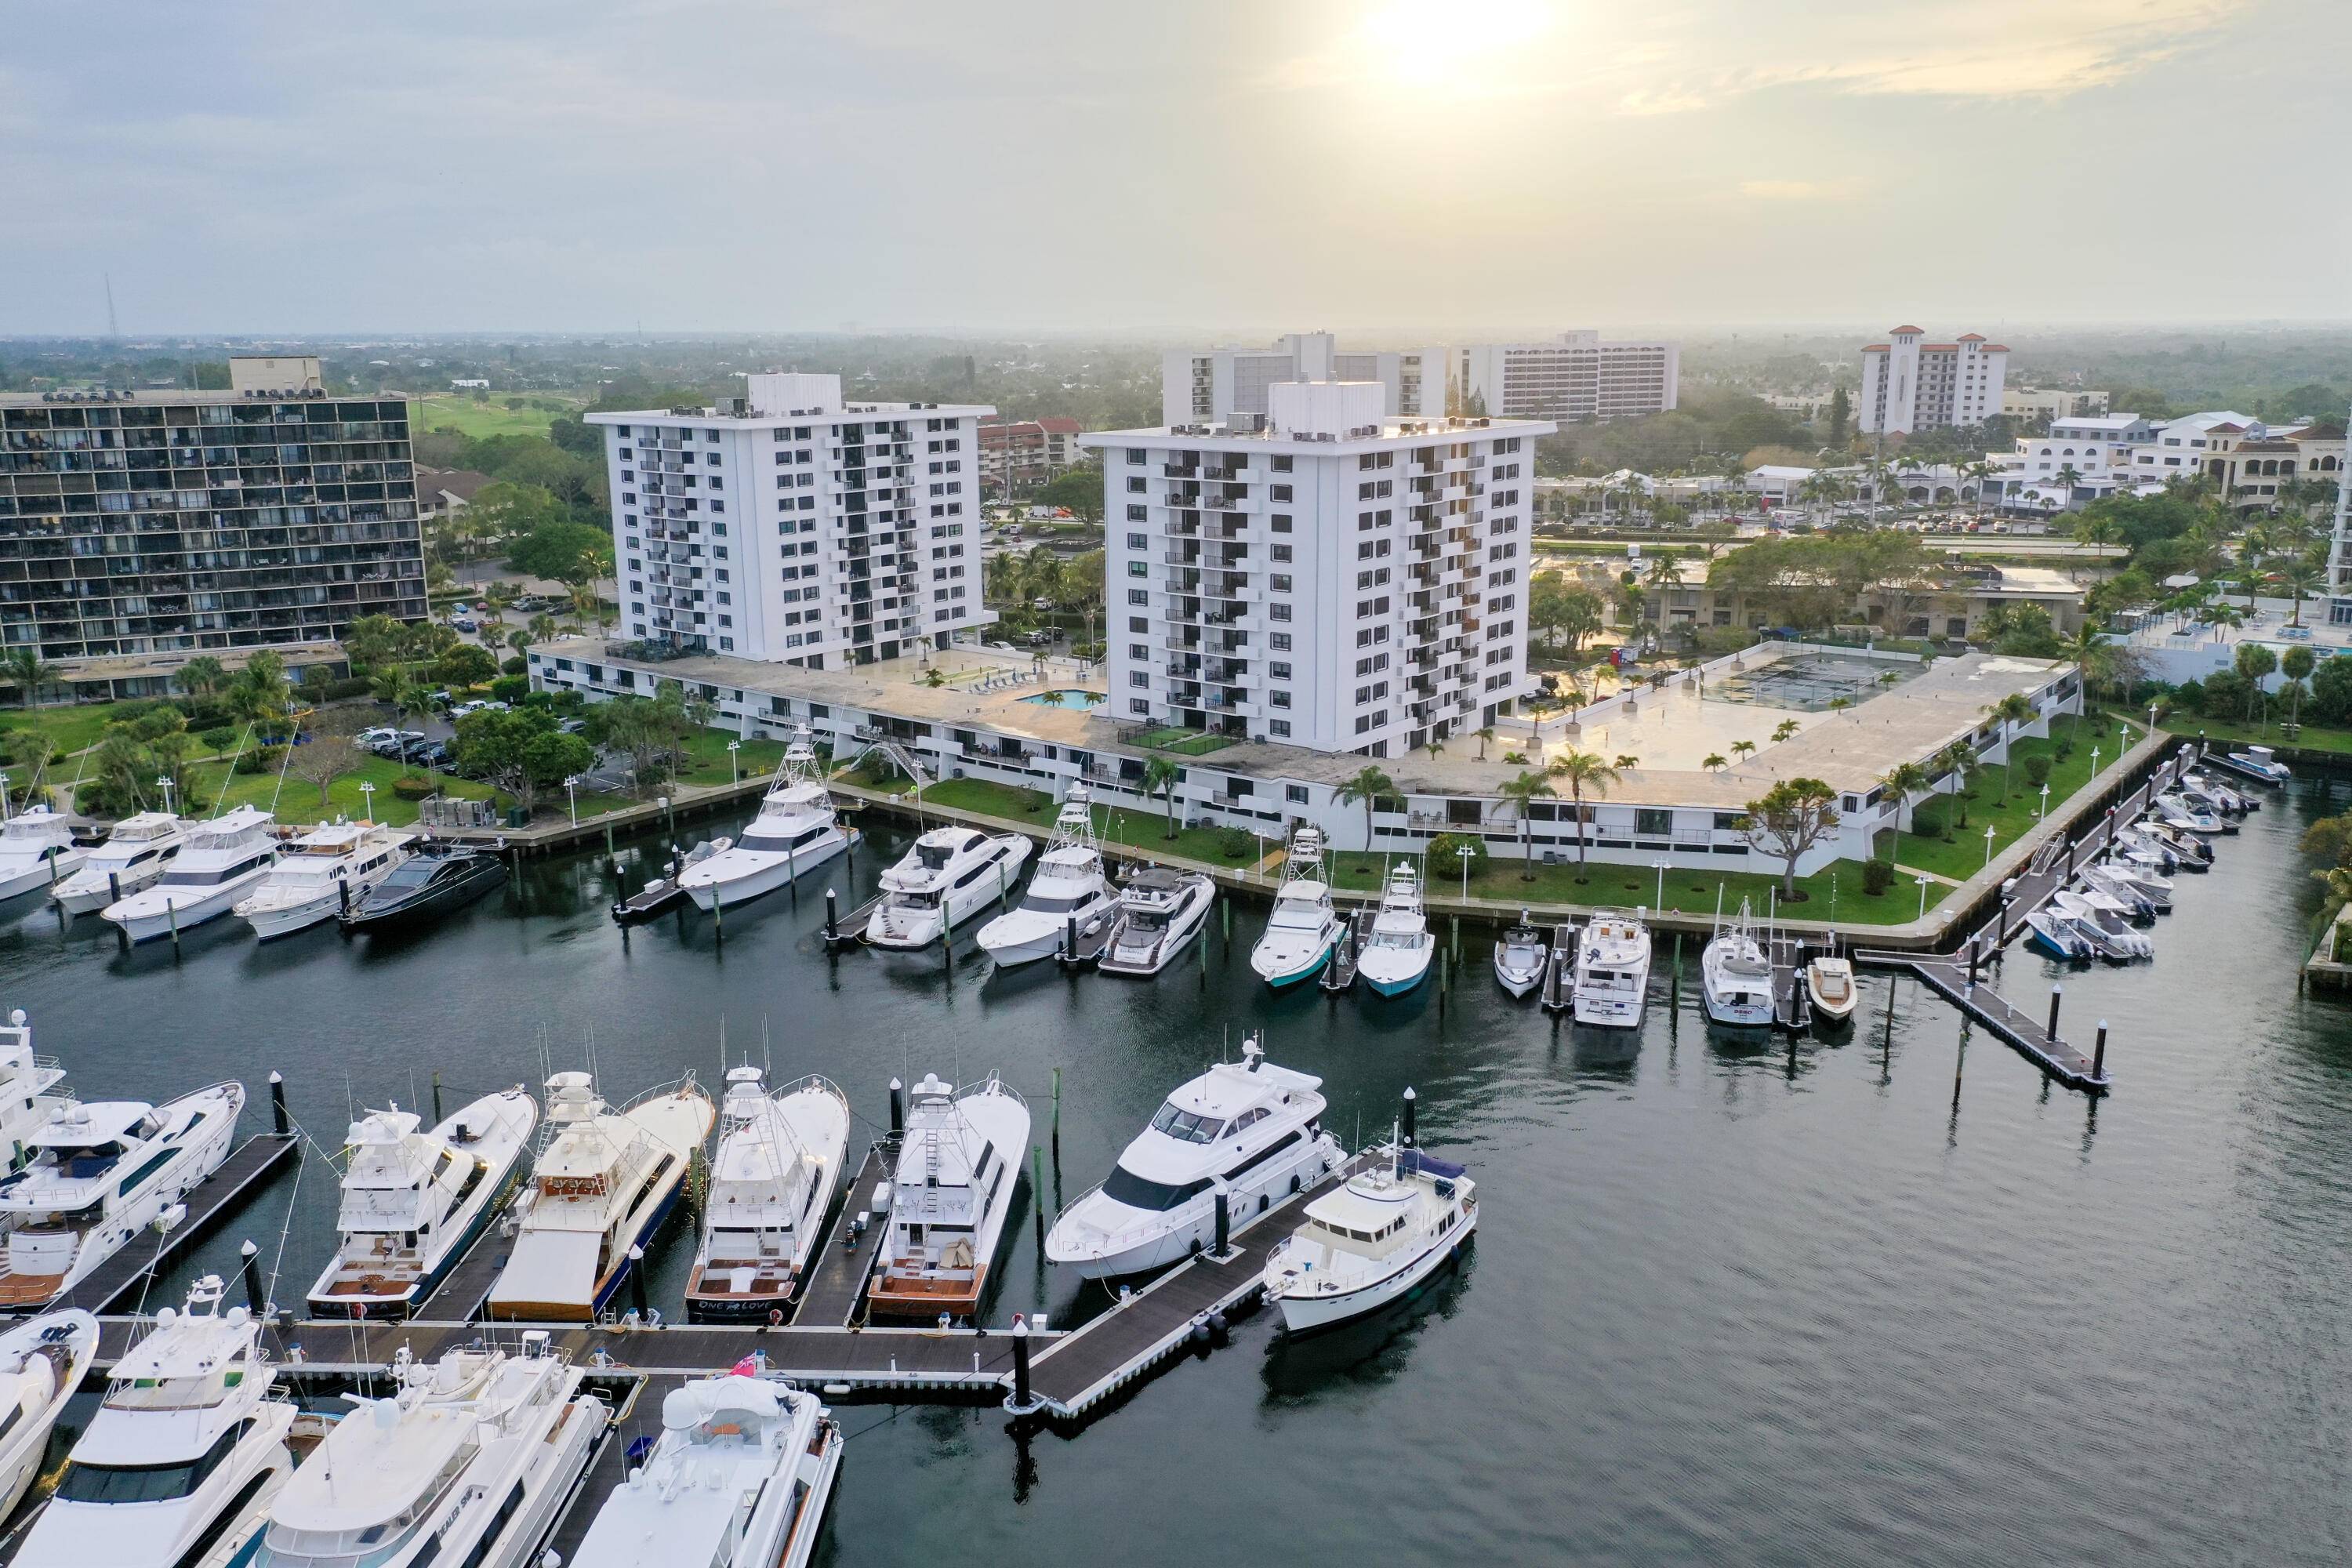 PRIME LOCATION Stunning sunrise and sunset views of the marina, inlet, and ocean right from the balcony of this 2 BR 2.